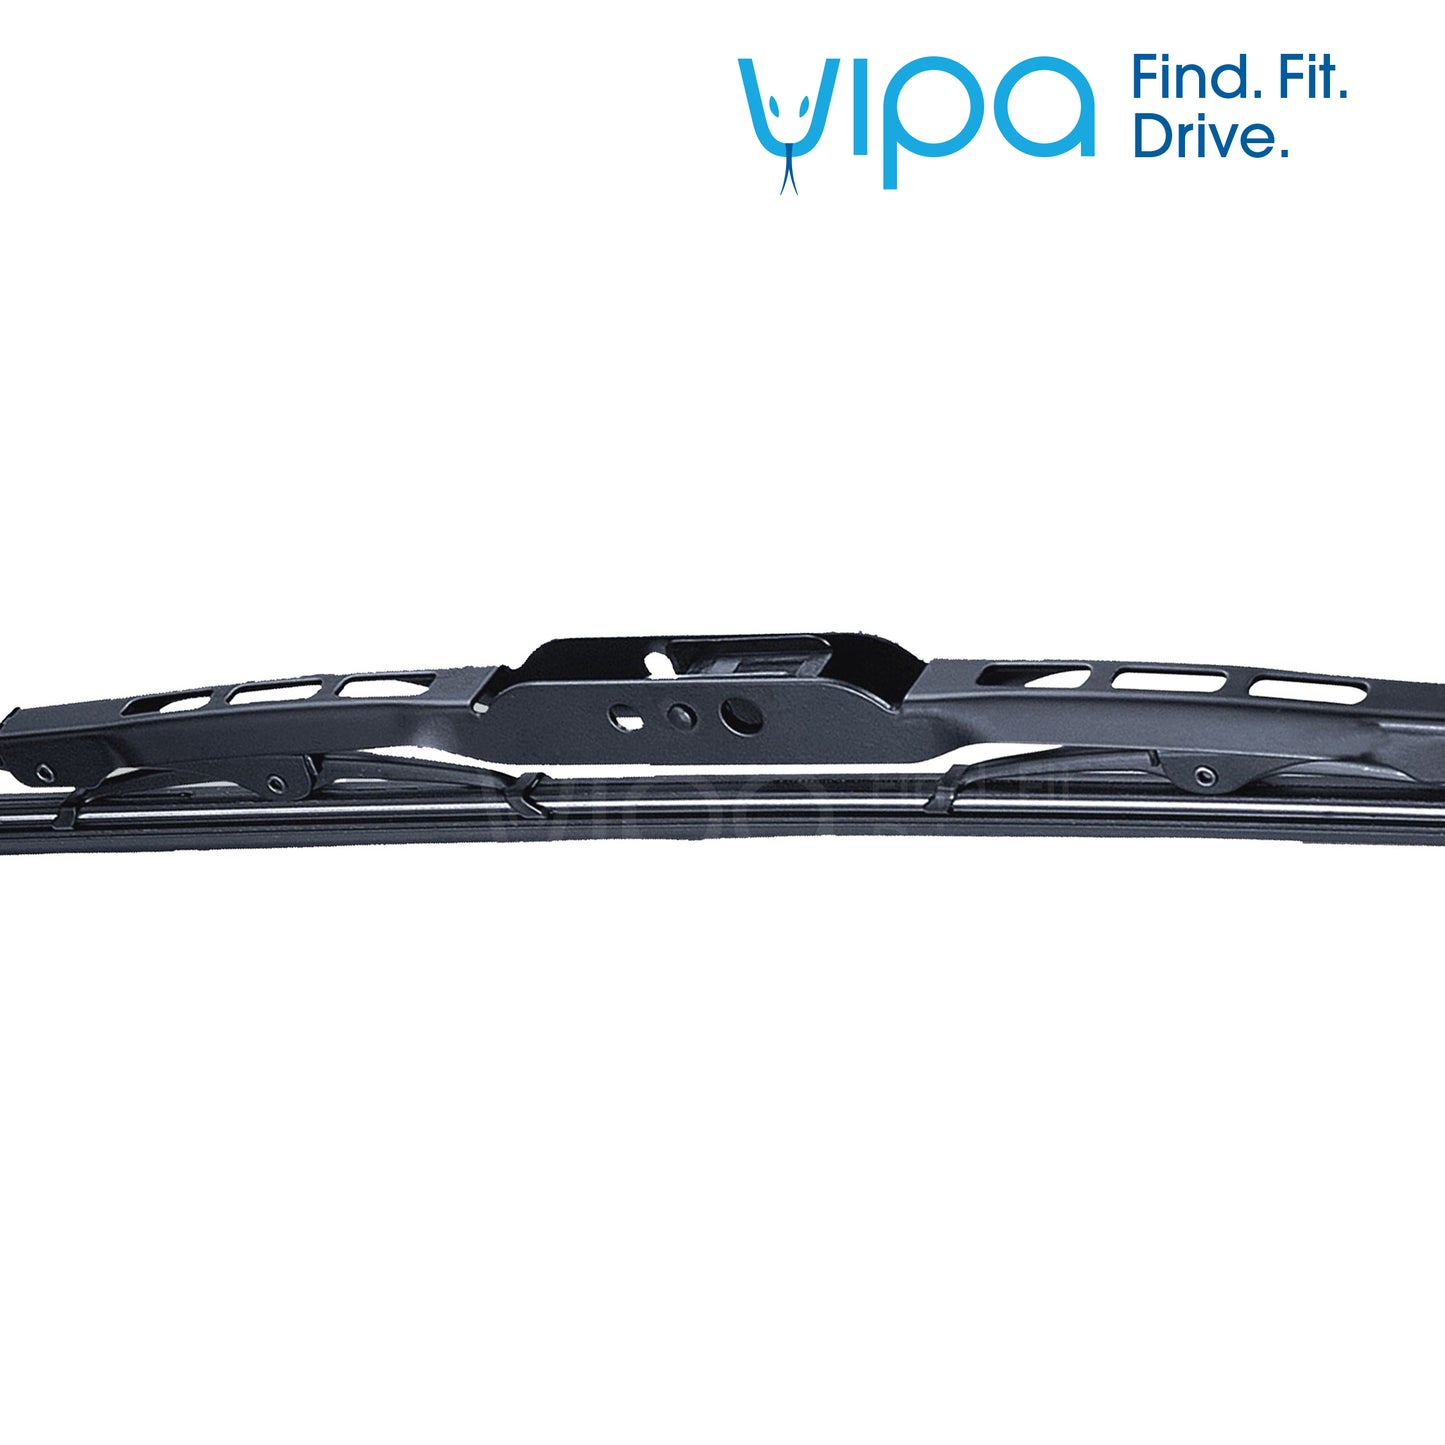 LAND ROVER DEFENDER SUV Aug 1990 to Feb 2016 Wiper Blade Kit